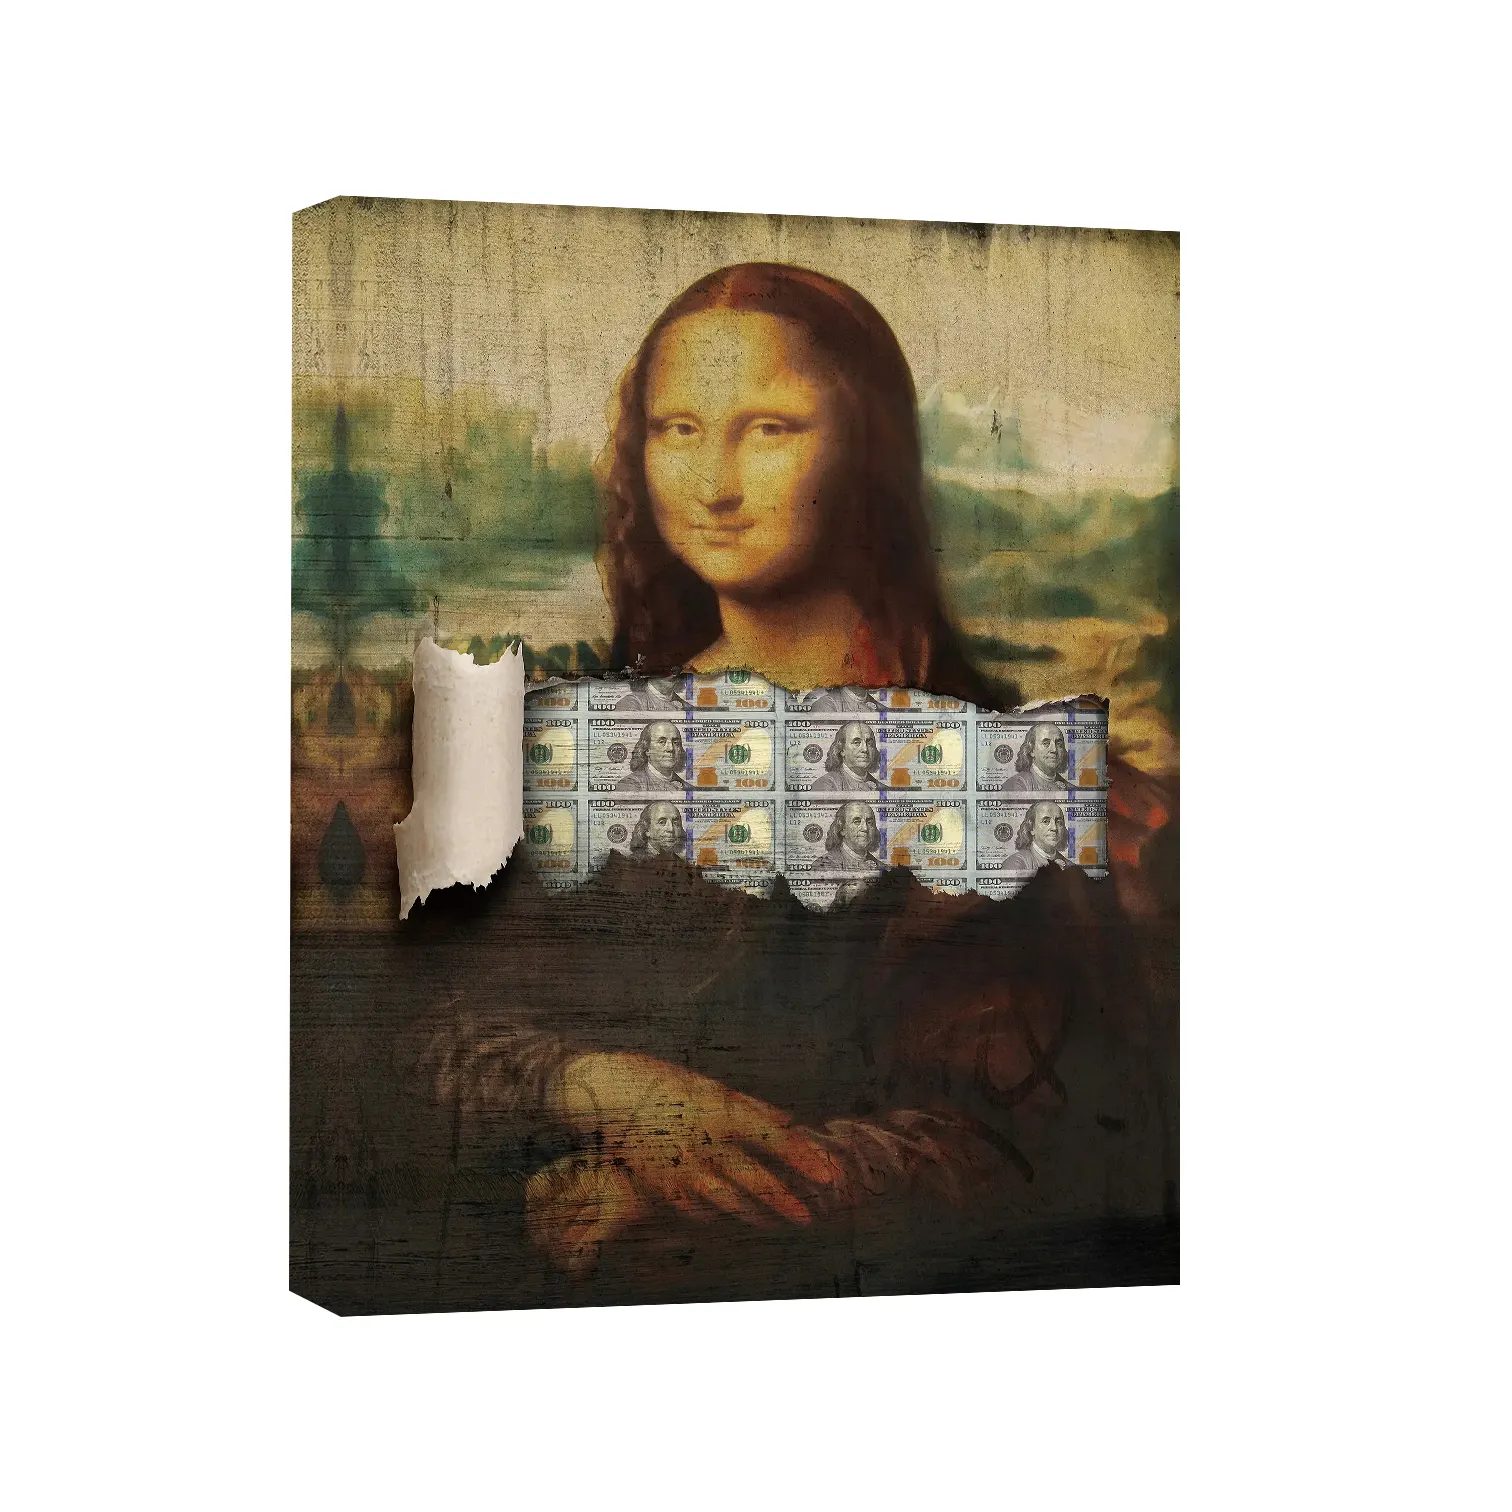 Creative portrait painting of Mona Lisa wall art for home decor print on canvas and poster money art Inspirational style